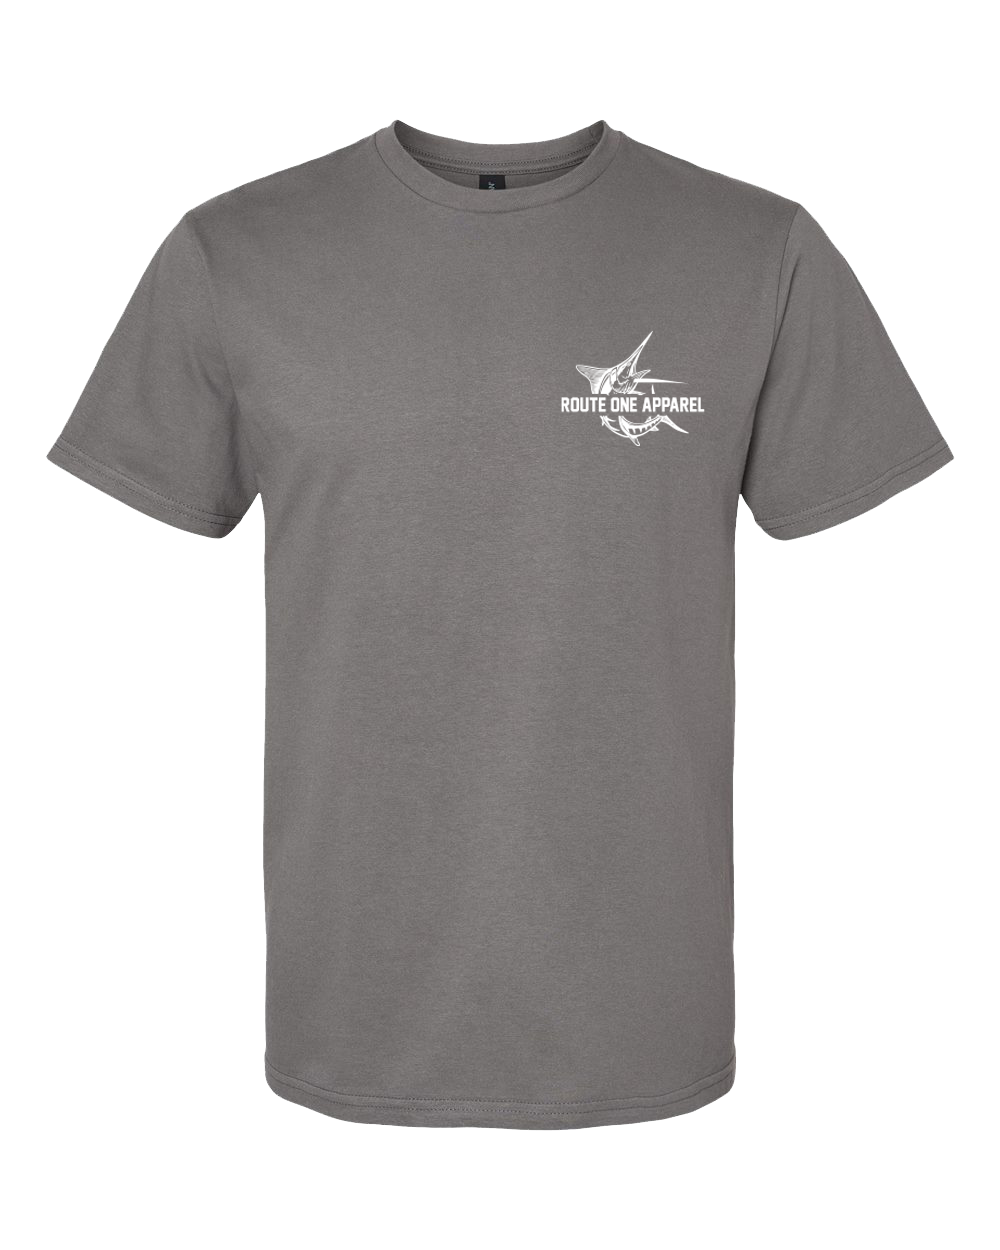 *PRE-ORDER* Boh Riding White Marlin (Charcoal) / Shirt - Route One Apparel